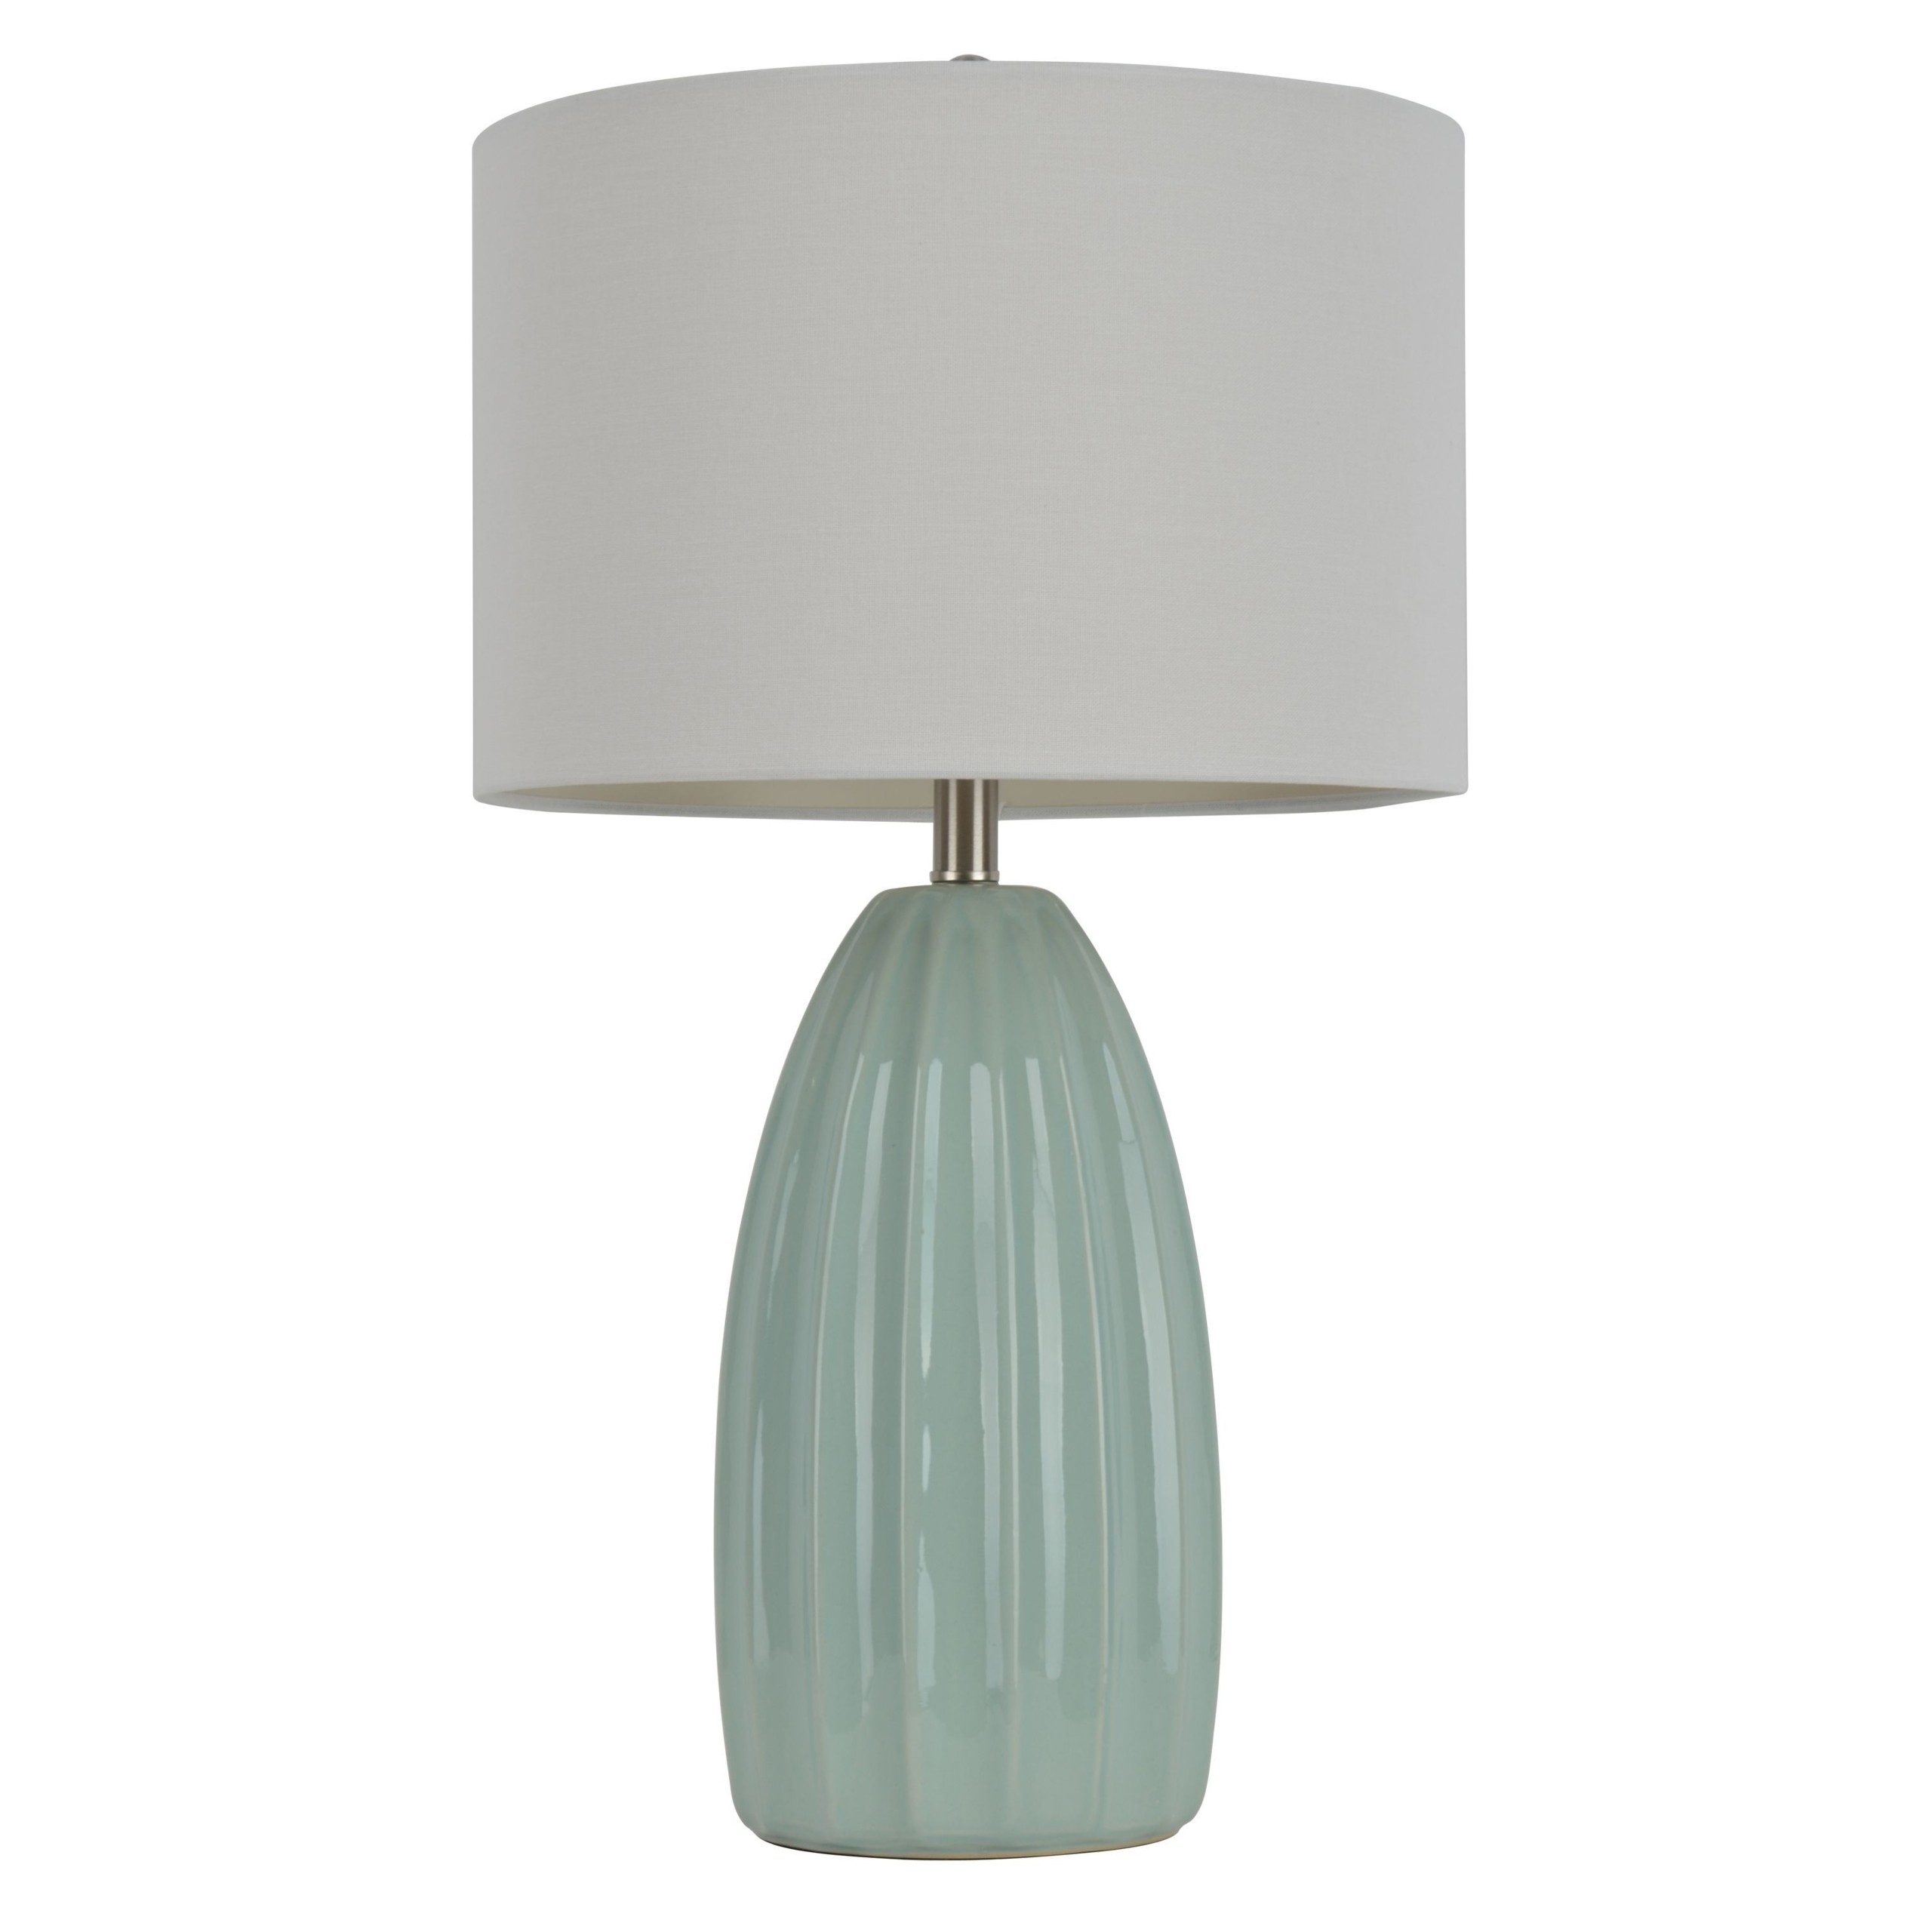 27" H Table Lamp with Drum Shade